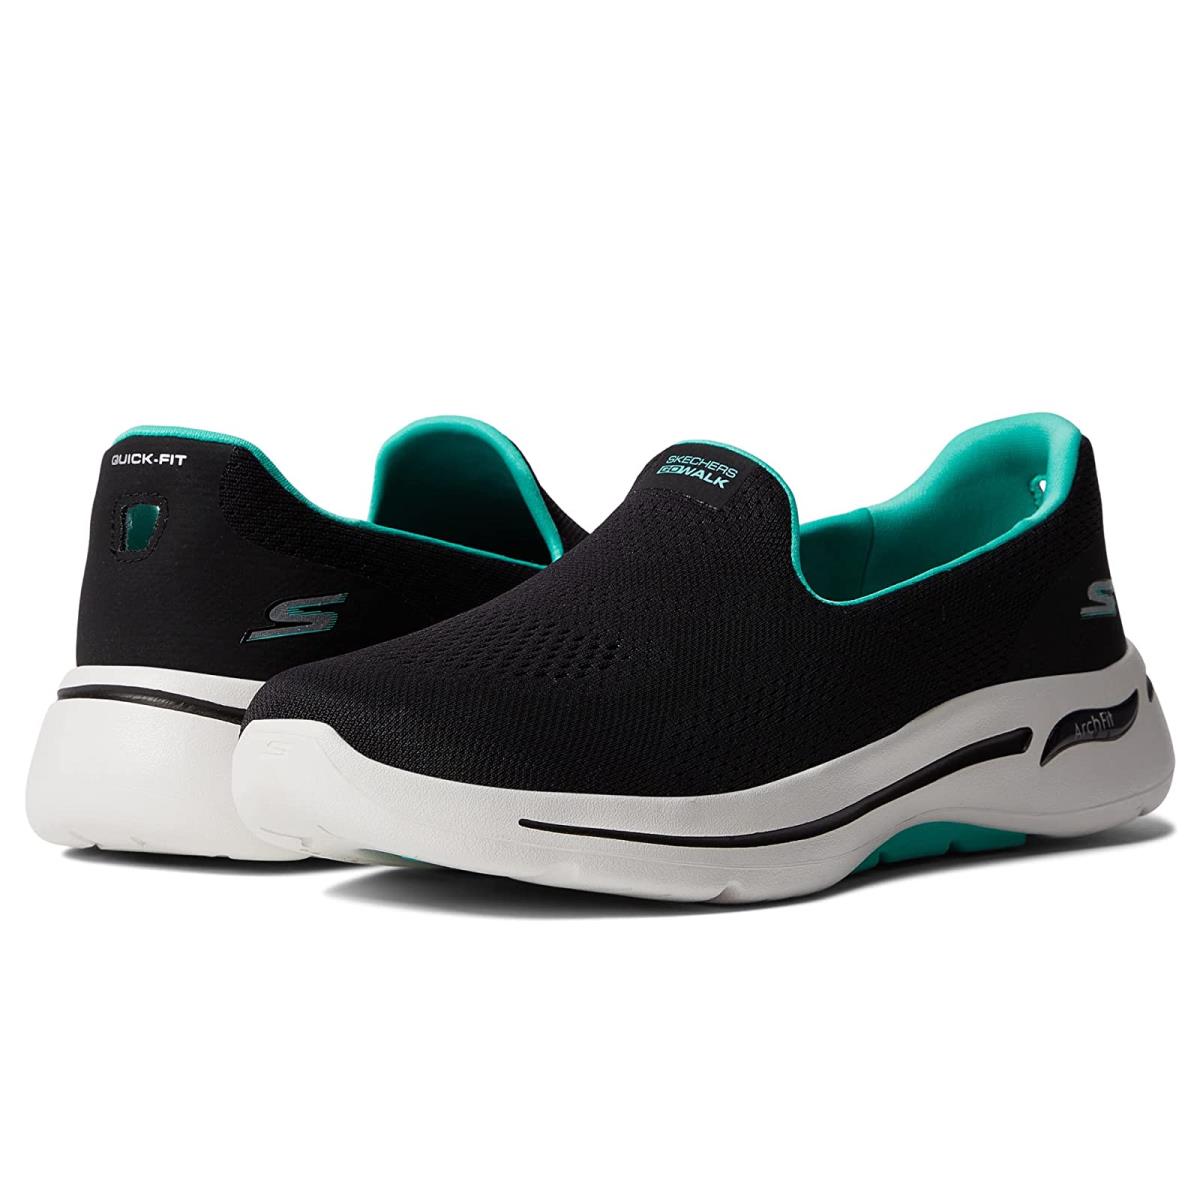 Woman`s Shoes Skechers Performance Go Walk Arch Fit - Imagined Black/Turquoise